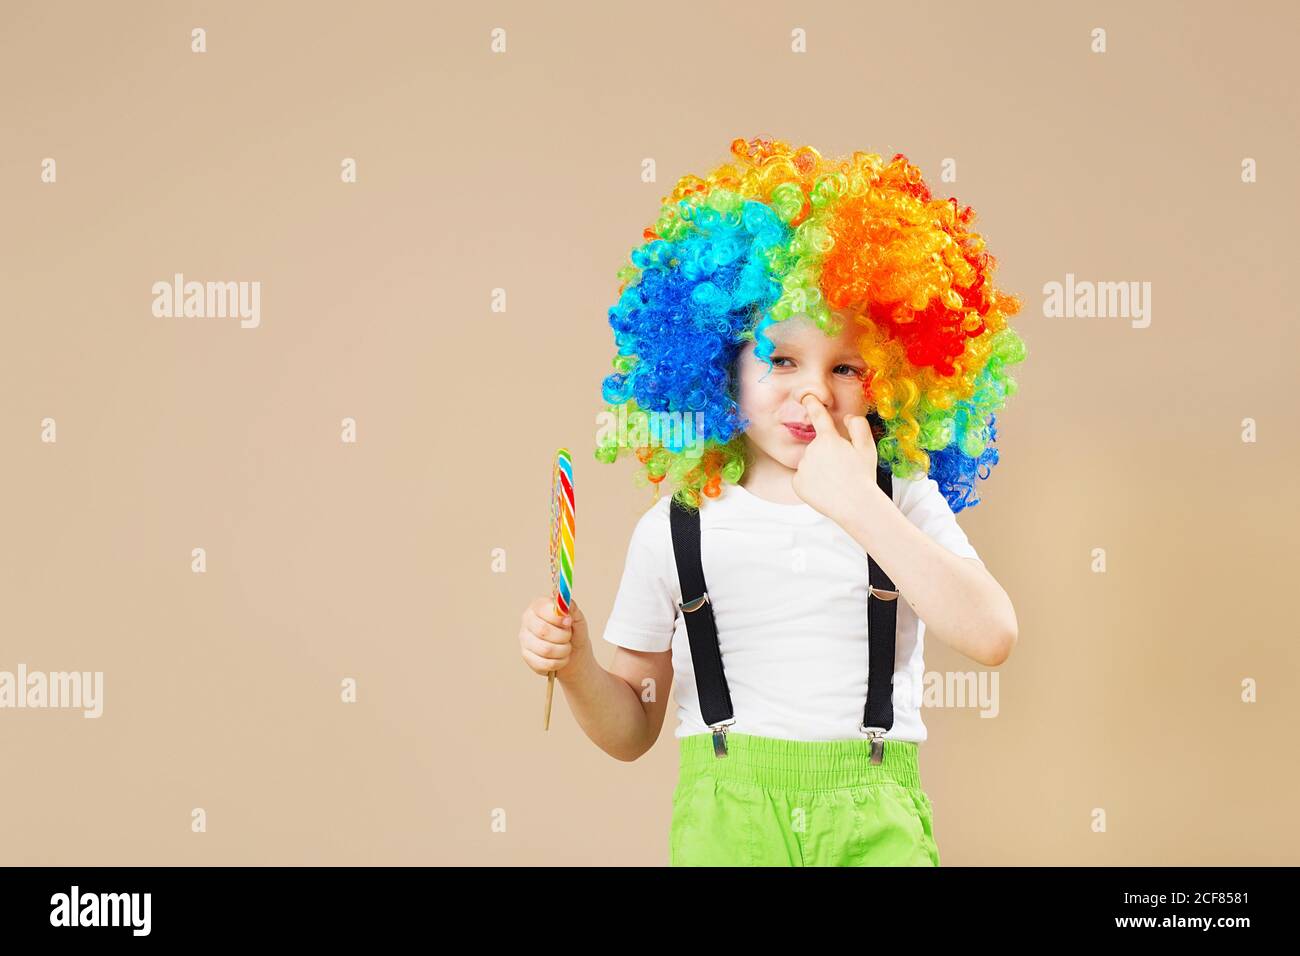 Happy clown boy in large colorful wig. Let's party! Funny kid clown. 1 April Fool's day concept. child eating lollipop. Finger in the nose. Picking in Stock Photo